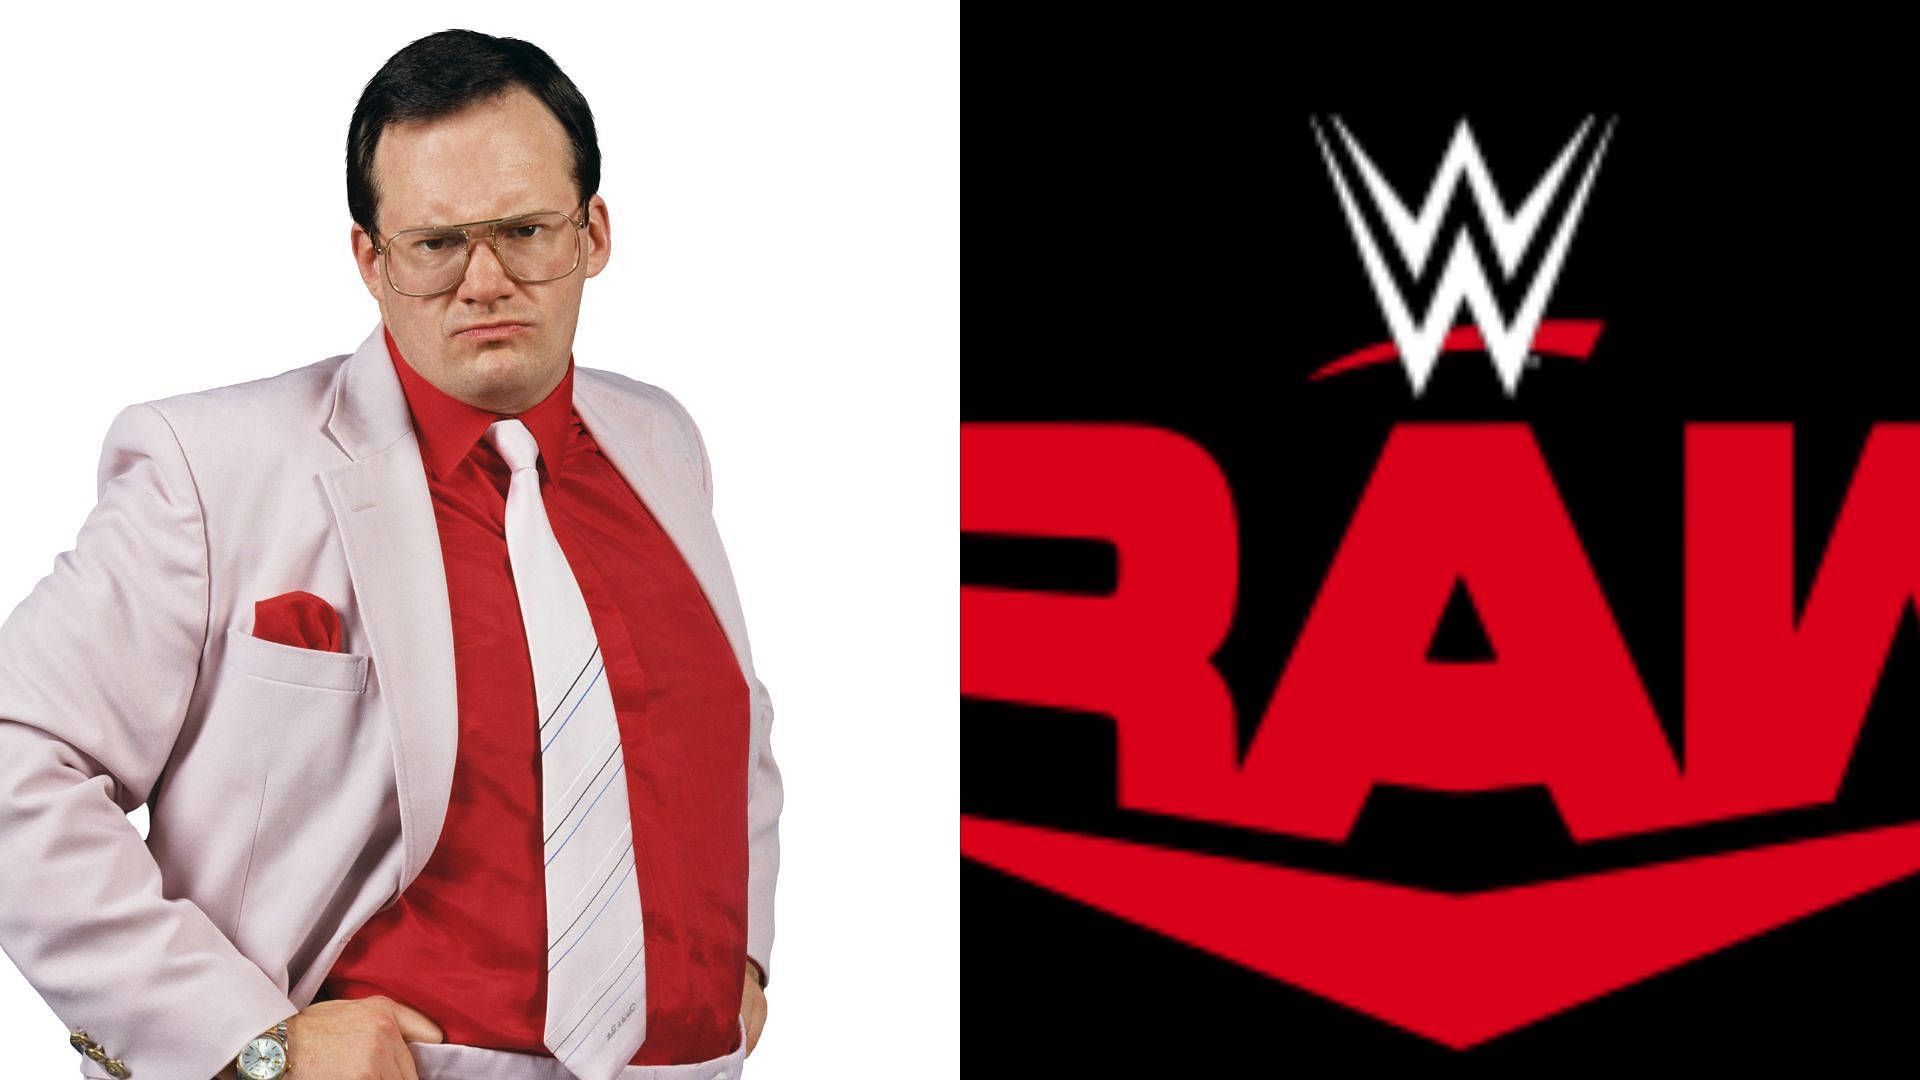 Jim Cornette was not happy with the WWE star